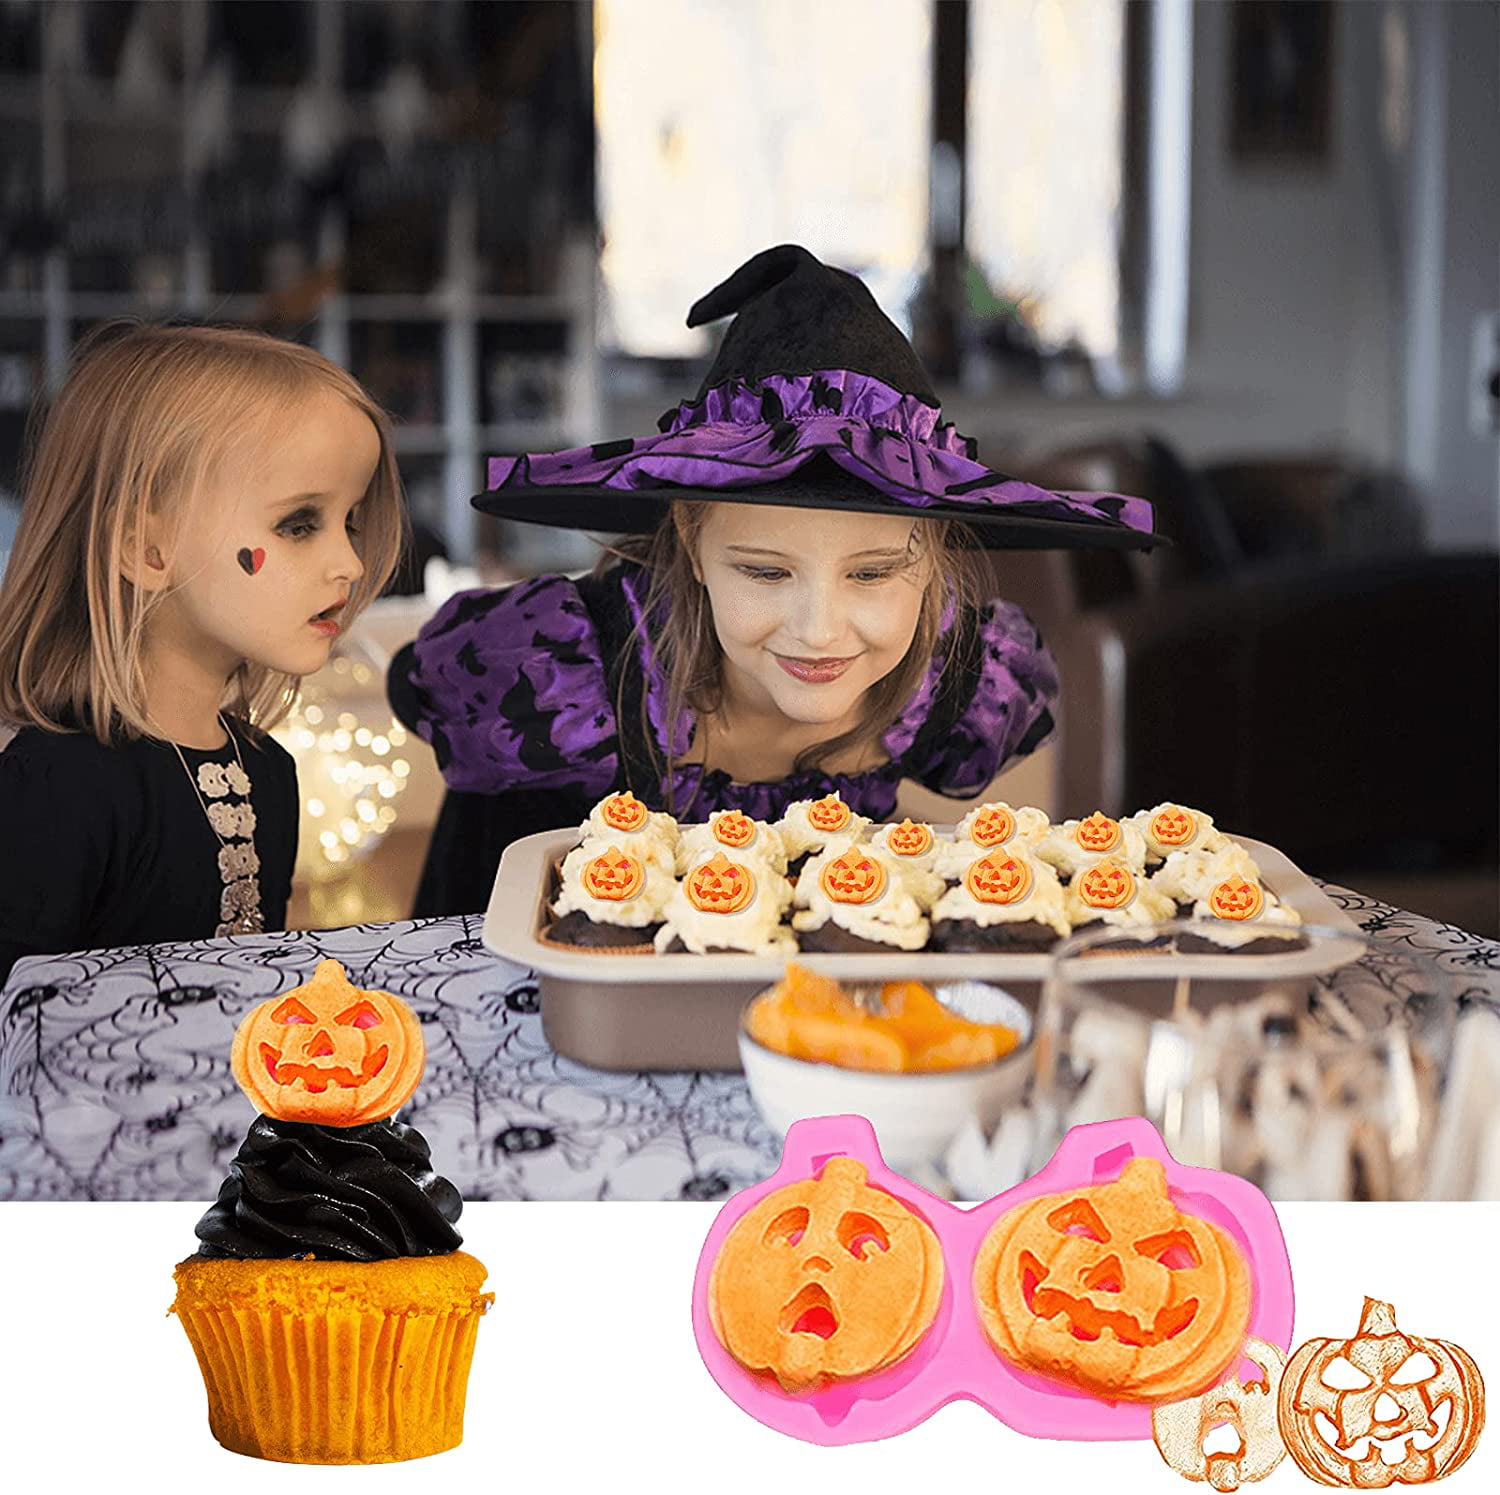 9Pcs/Set Halloween Themed Fondant Mold Pumpkin Skull Spider Skeleton Owl Branch Bat Silicone Chocolate Candy Mold for Halloween Party Cupcake Cake Topper Decorating 